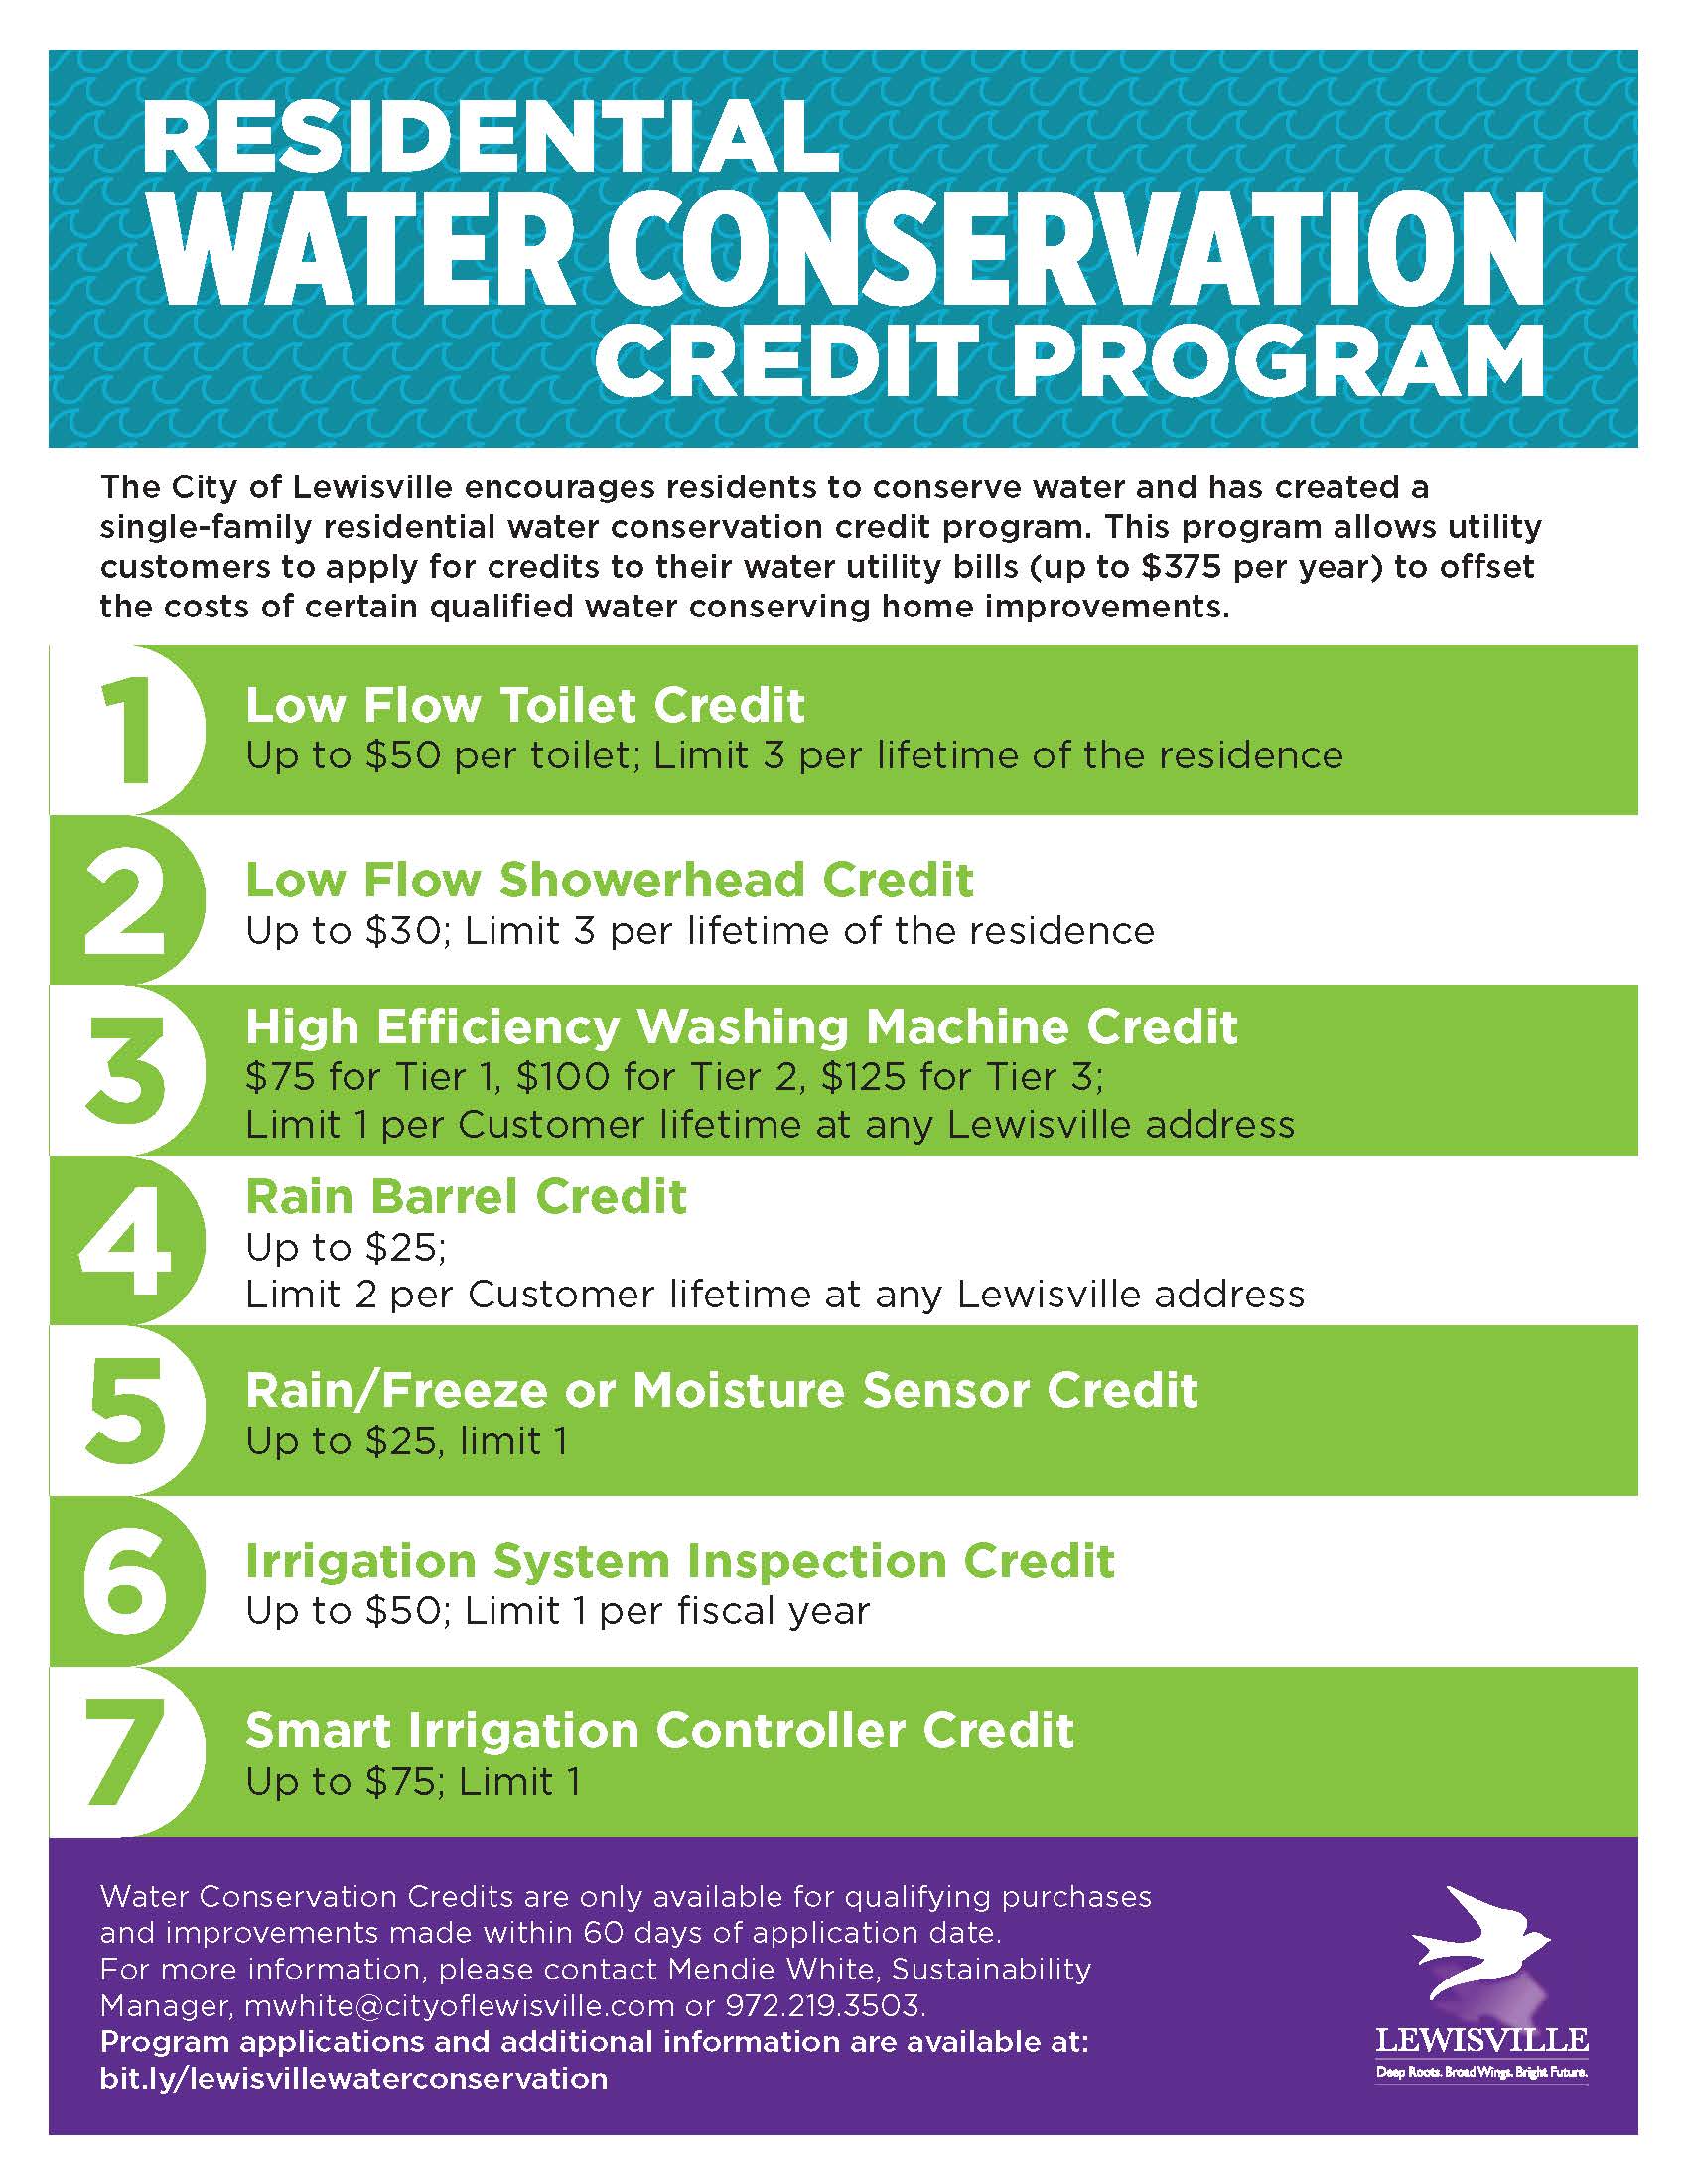 CH flyer 13 - Sustainability - Water Conservation